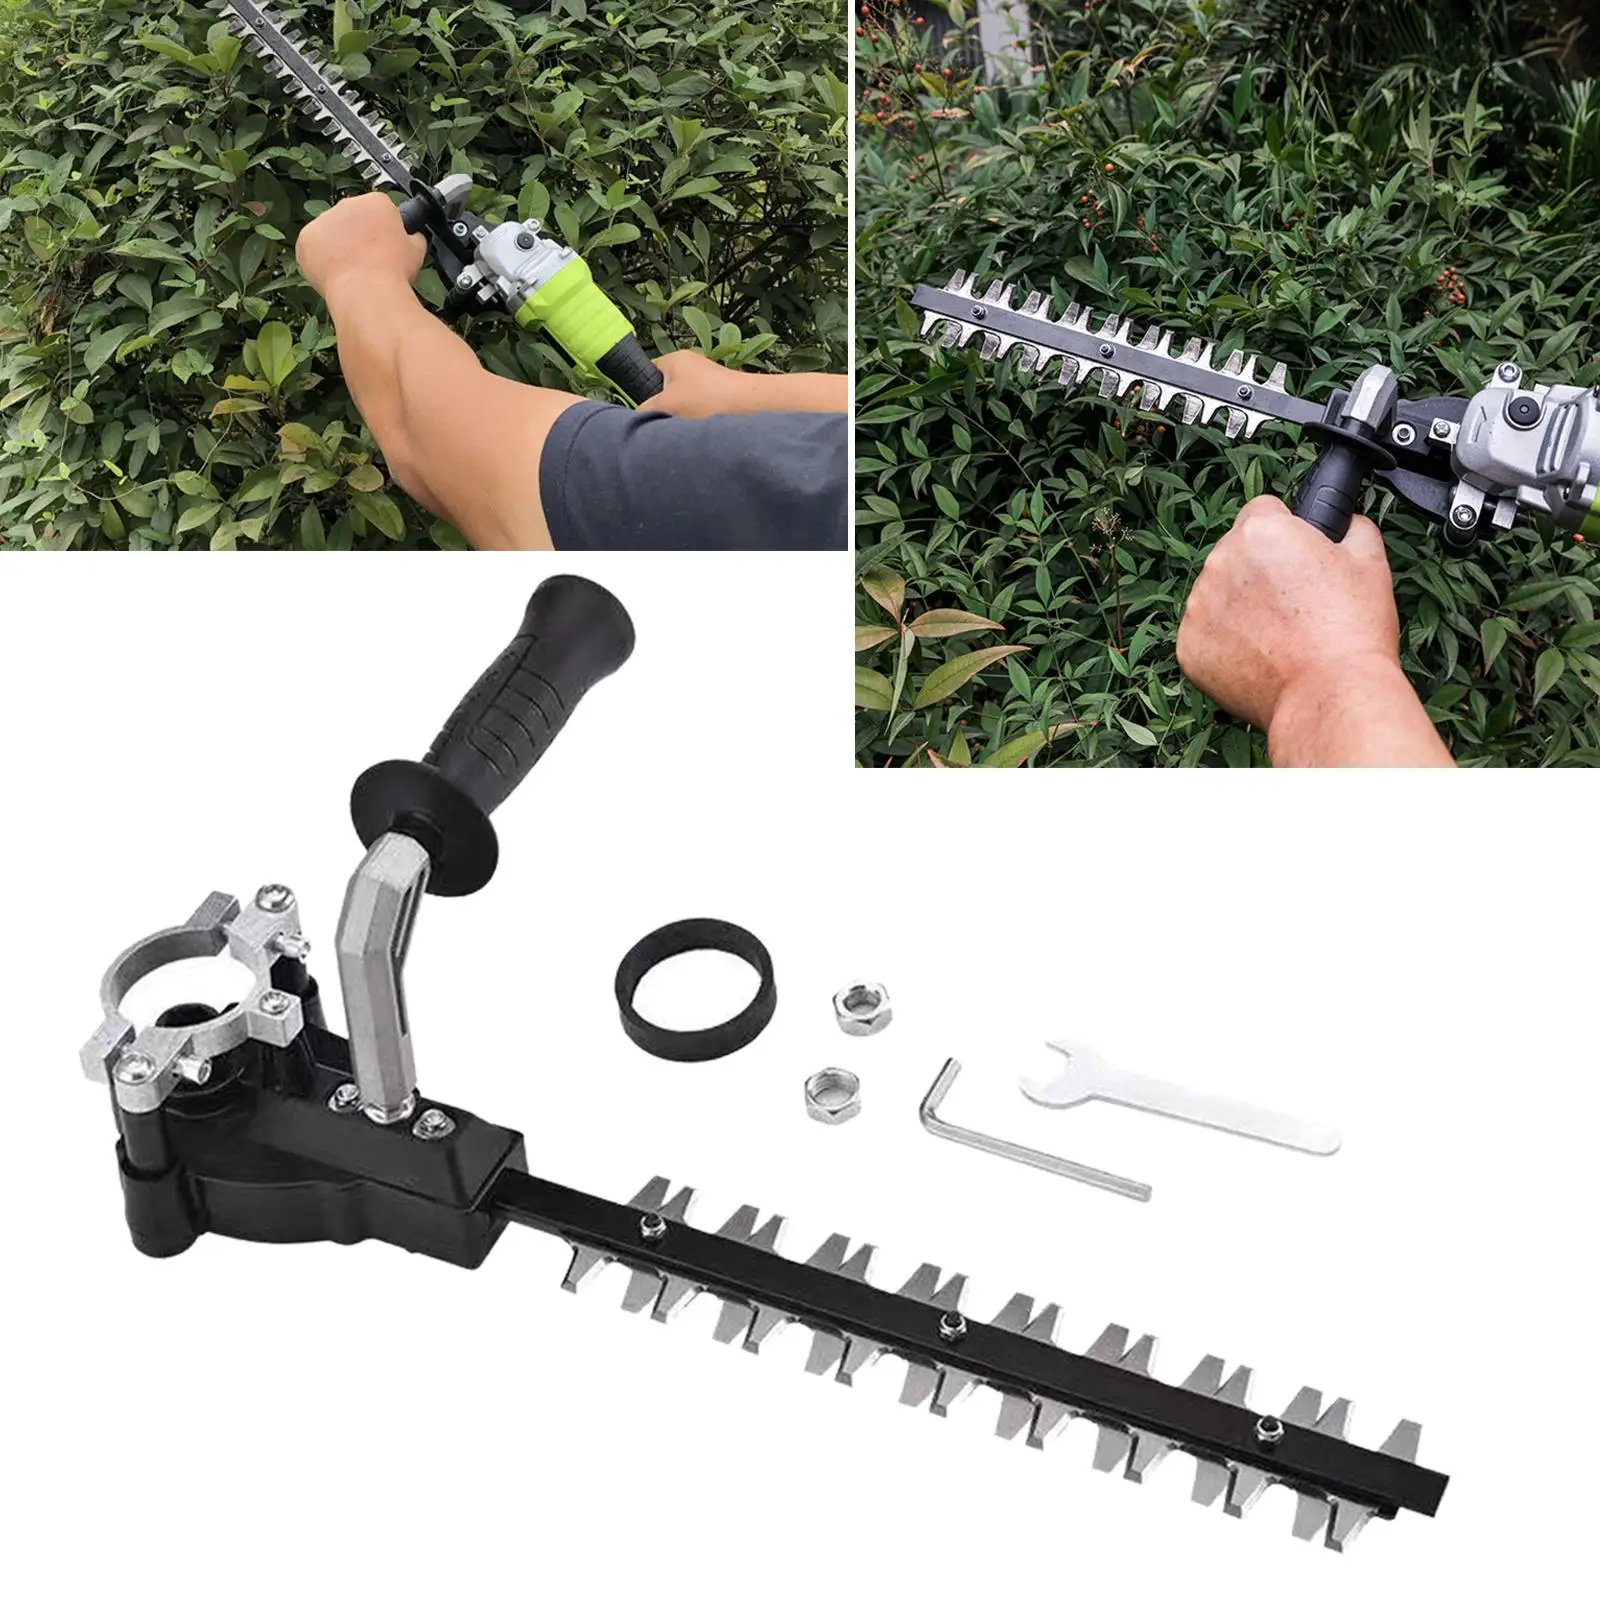 Electric Hedge Trimmer Powerful Lightweight Branch Trimmers Cutter Accessories Hedge Clipper Handheld Trimmer for Yard Bush Lawn